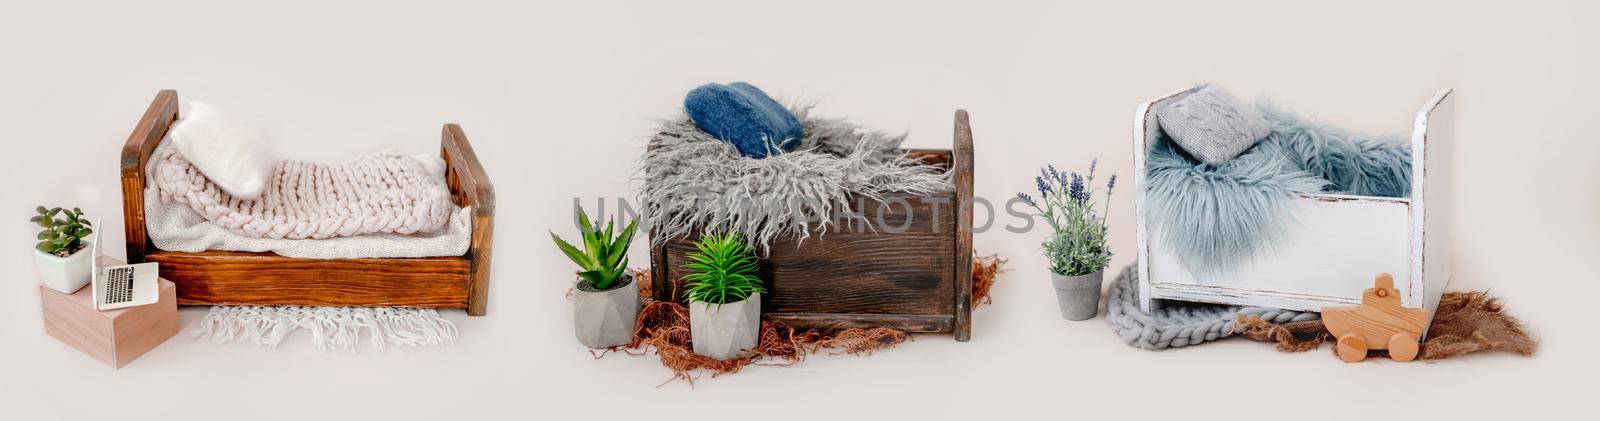 Newborn baby handmade beds and studio decoration for infant photoshoot collage mix